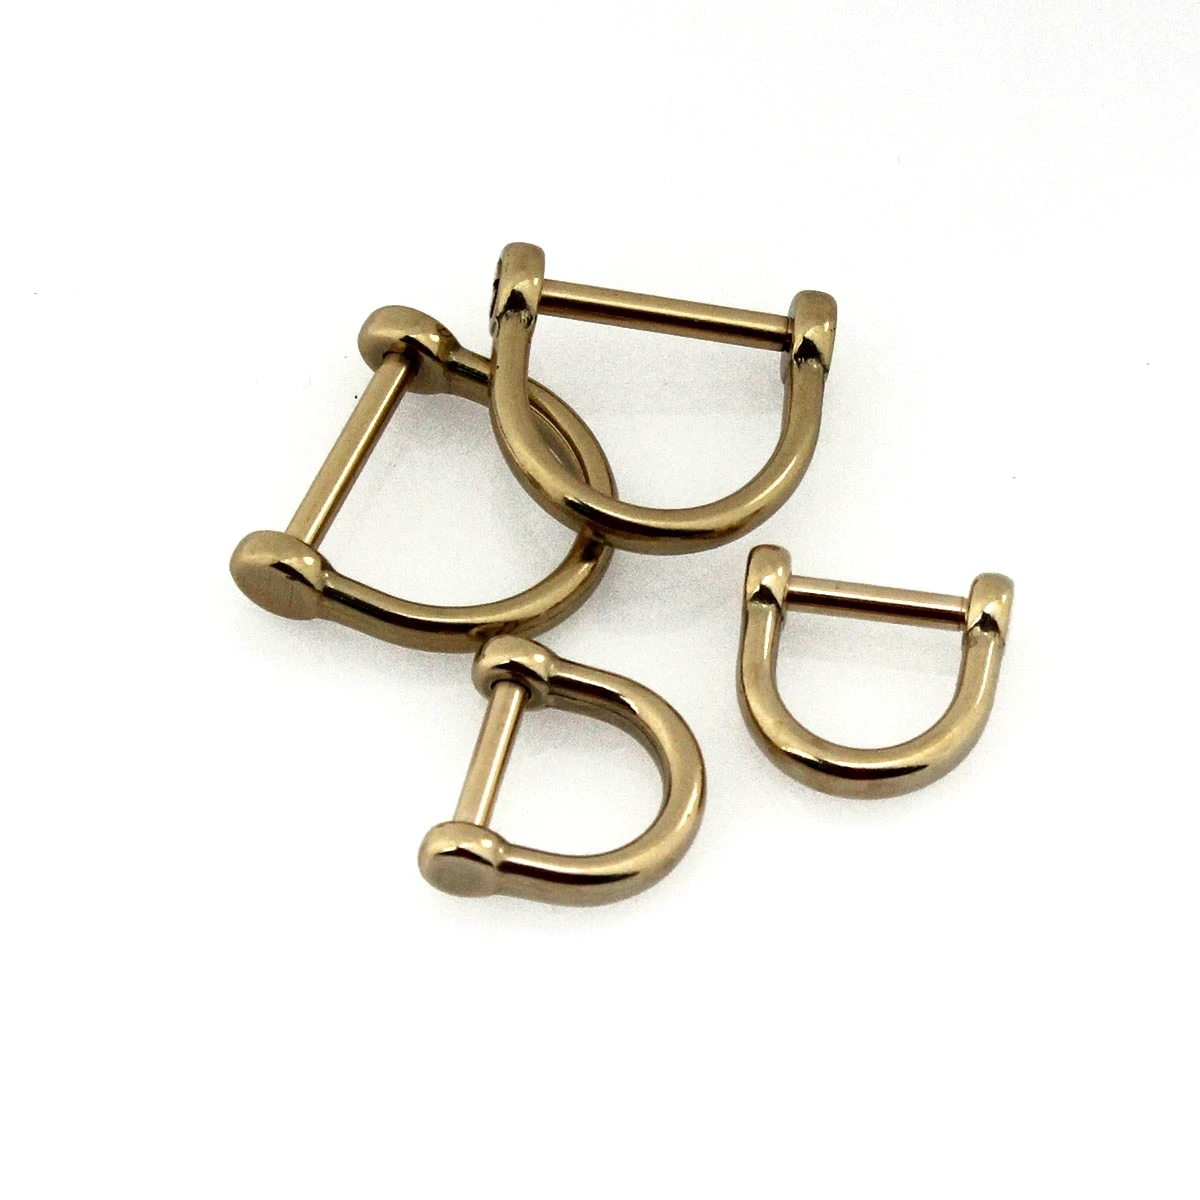 

1 x Solid Brass D Shackle Clasp Metal Buckle Keychain Ring Hook Screw Pin Joint Connecter Bag Strap Clasp Leathercraft Accessory